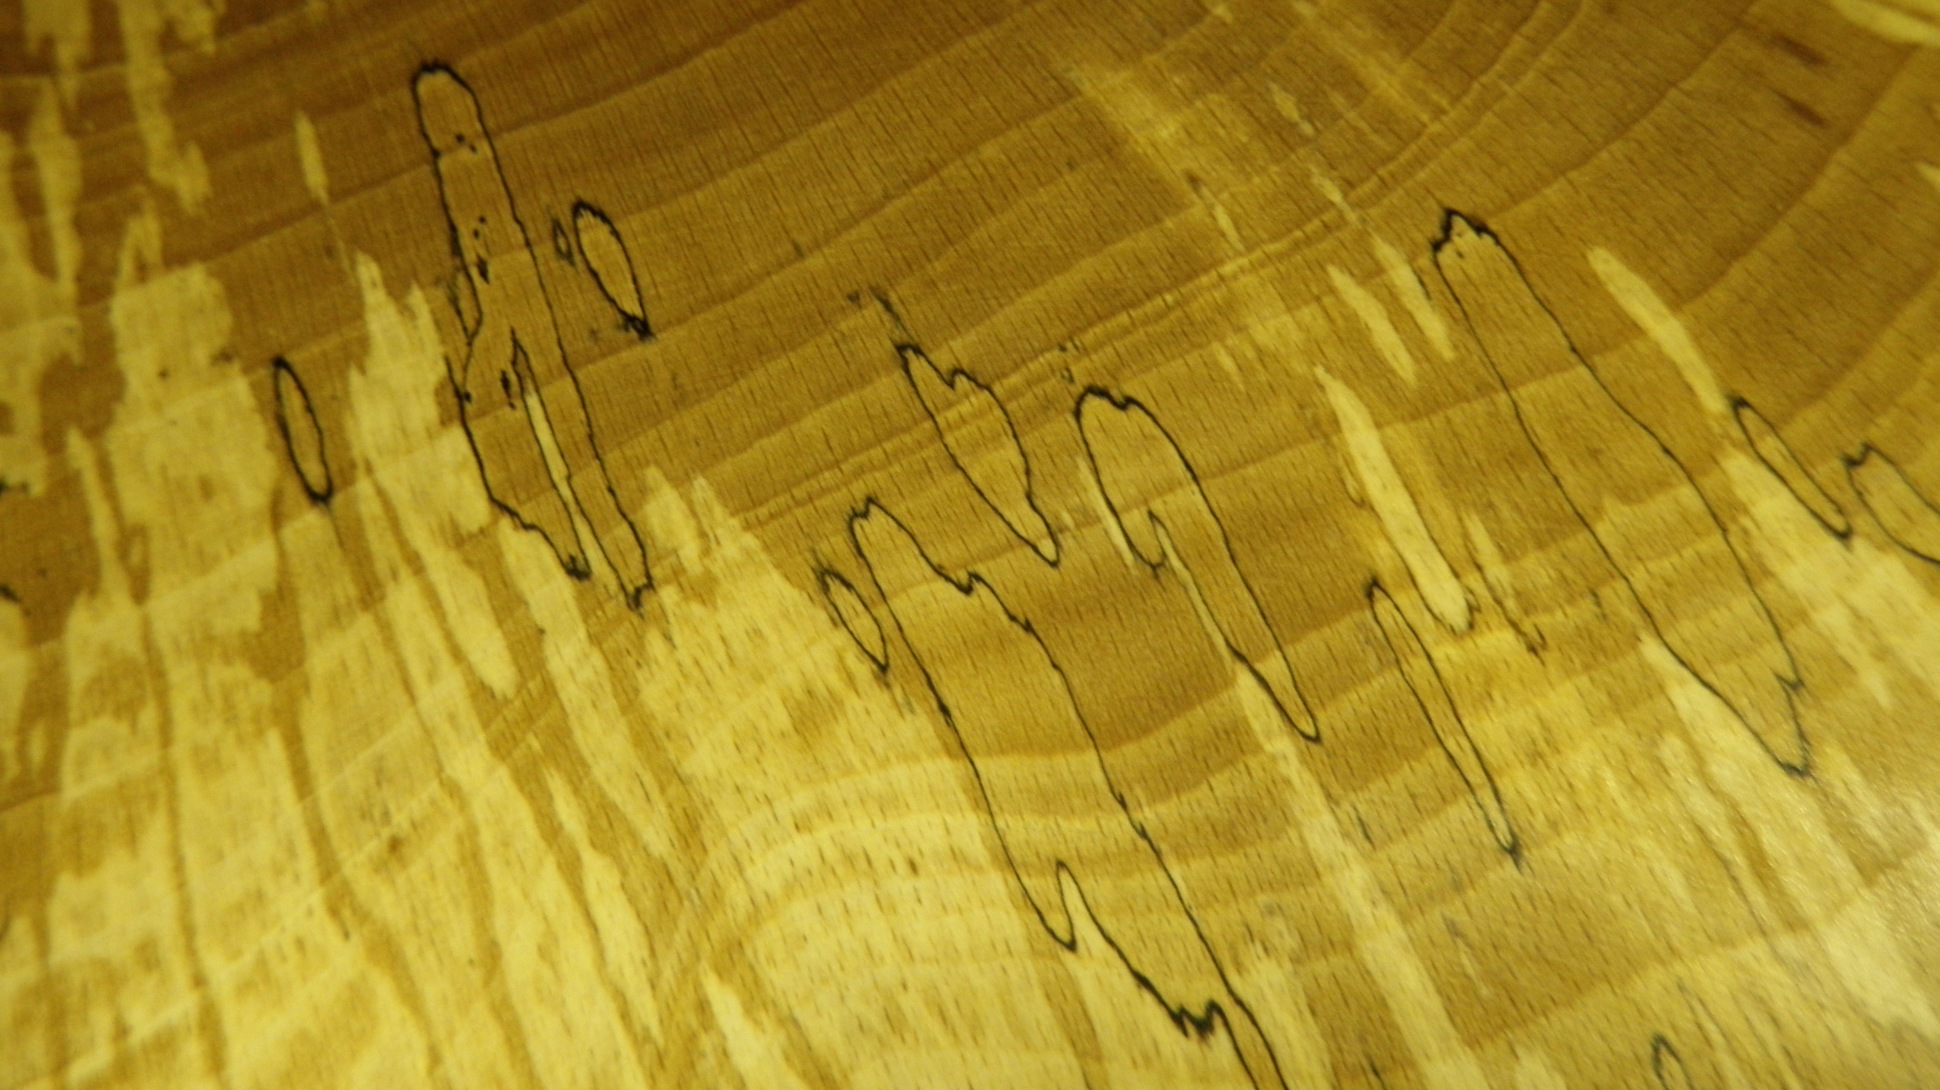 A close up on wood showing areas with lighter colouring and black lines running through it